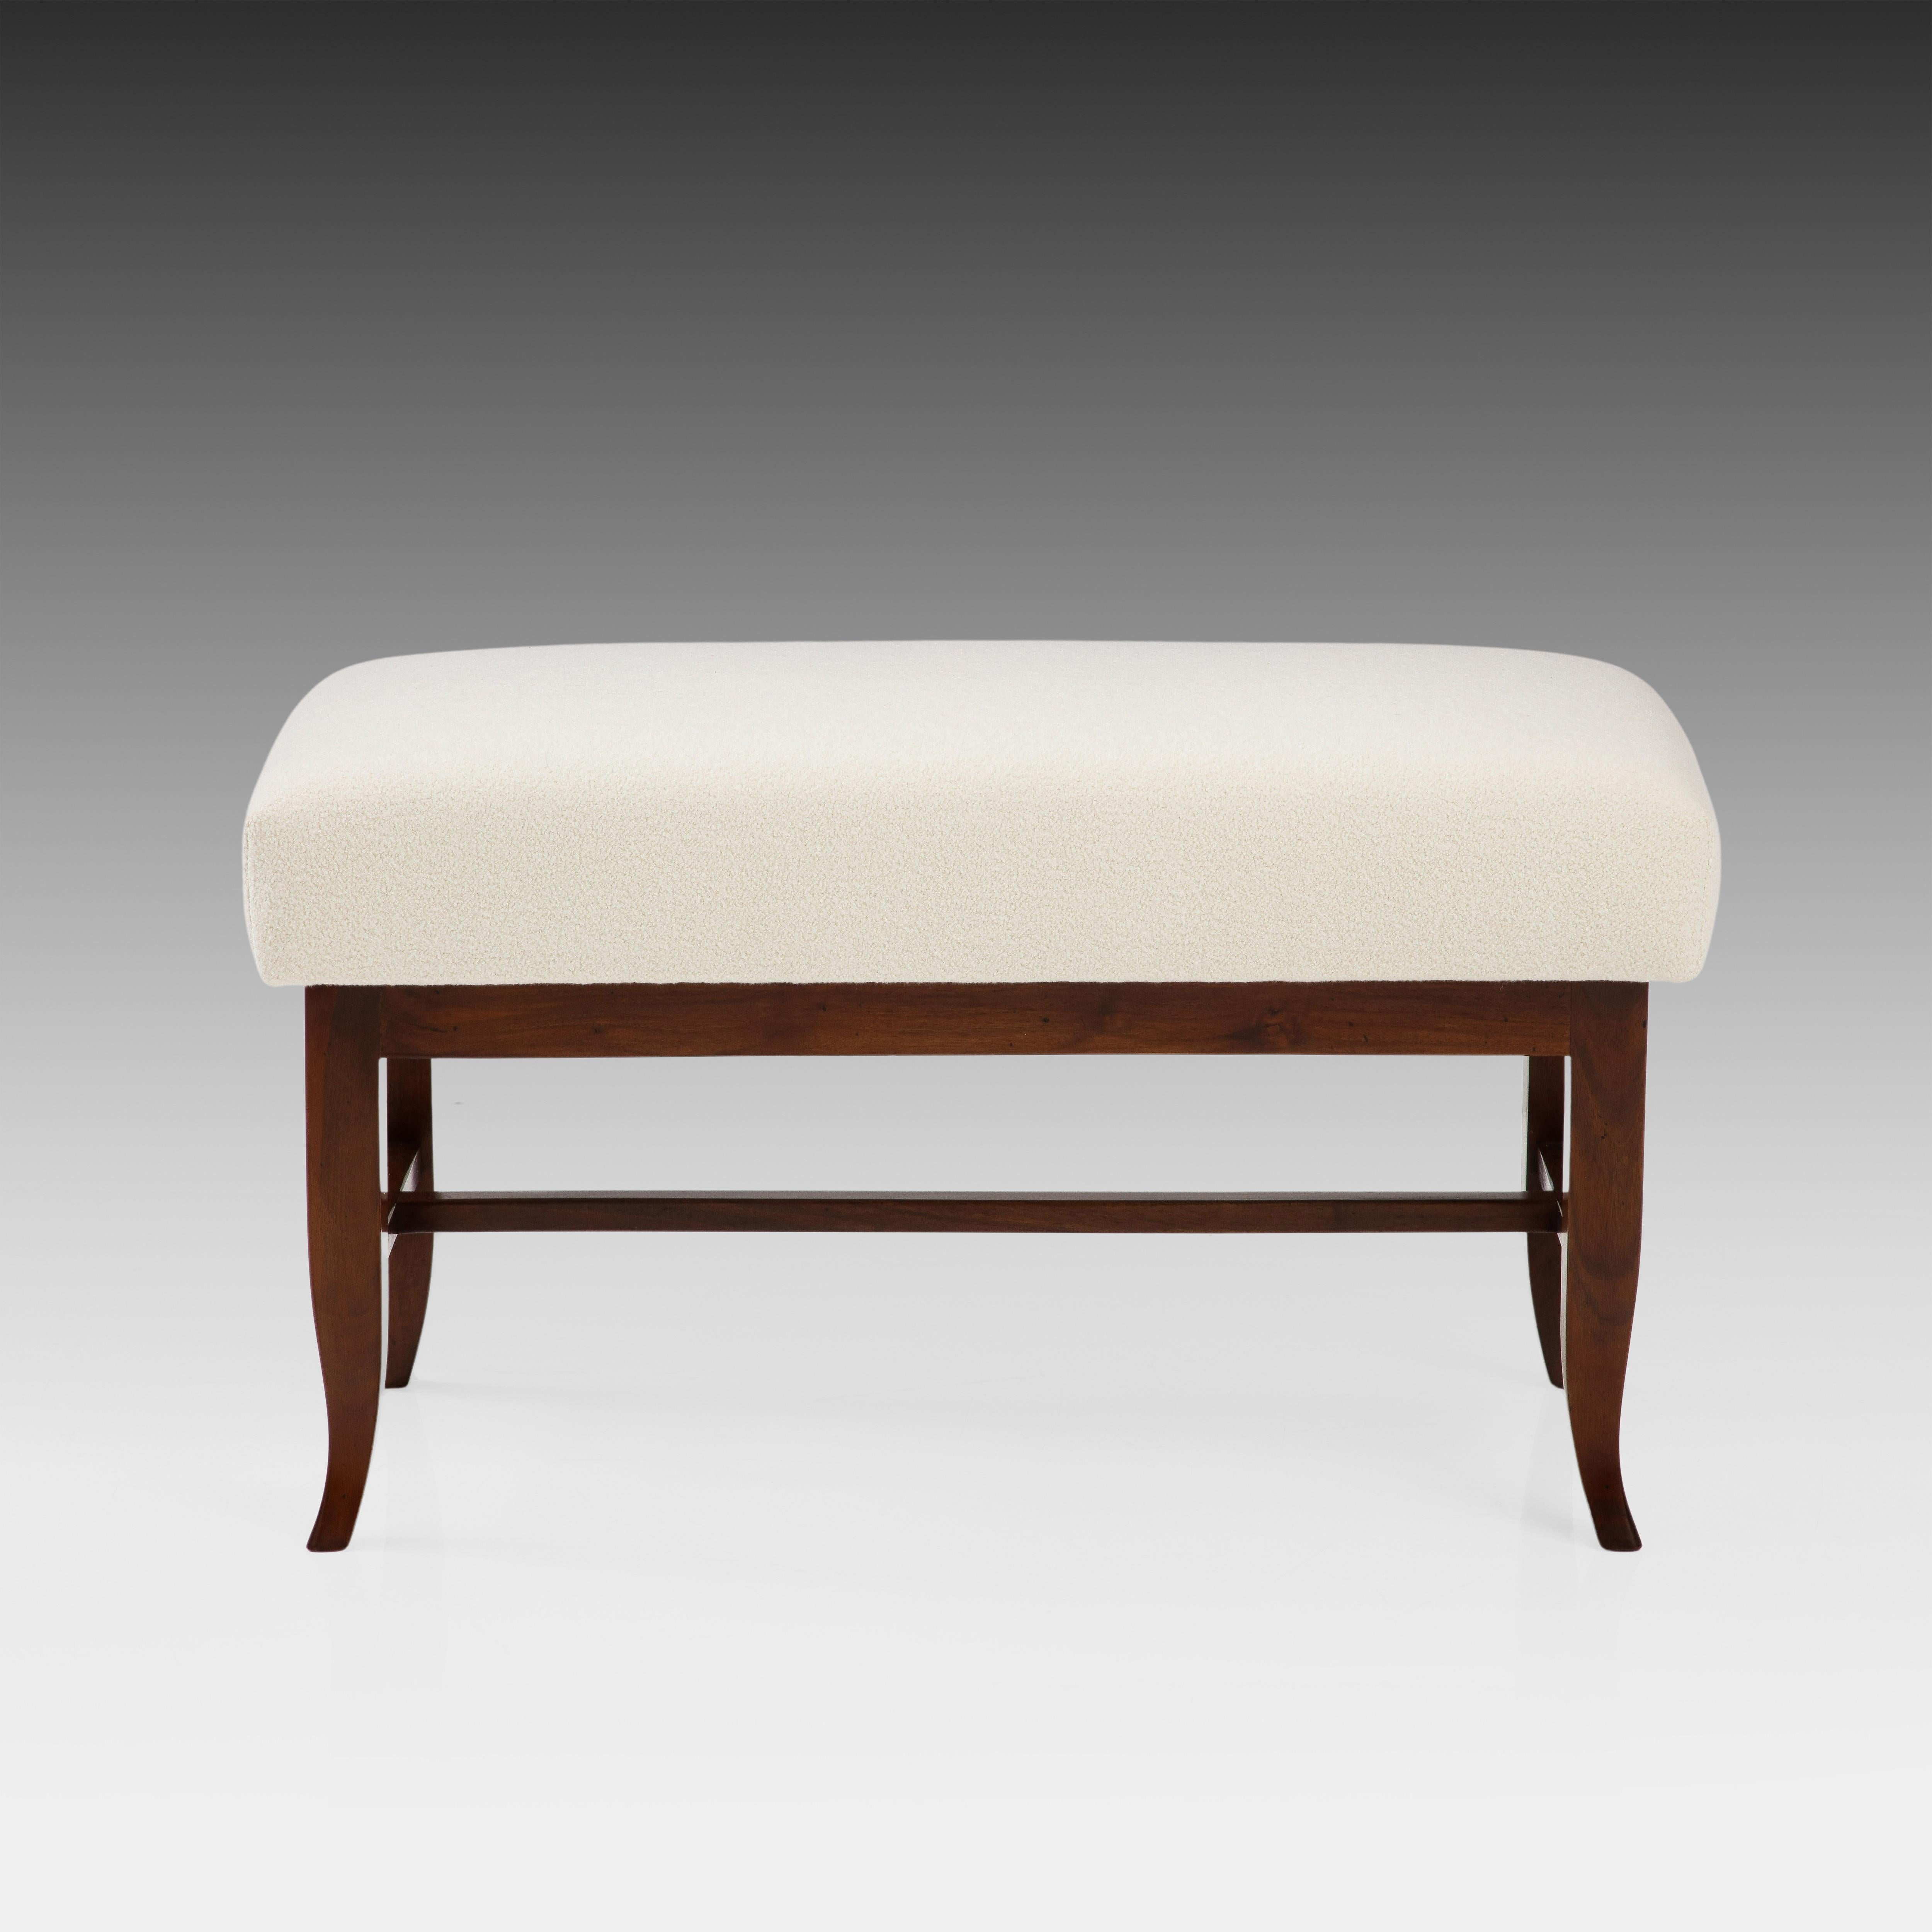 Gio Ponti Rare Pair of Benches in Walnut and Ivory Bouclé, Italy, 1930s In Good Condition For Sale In New York, NY